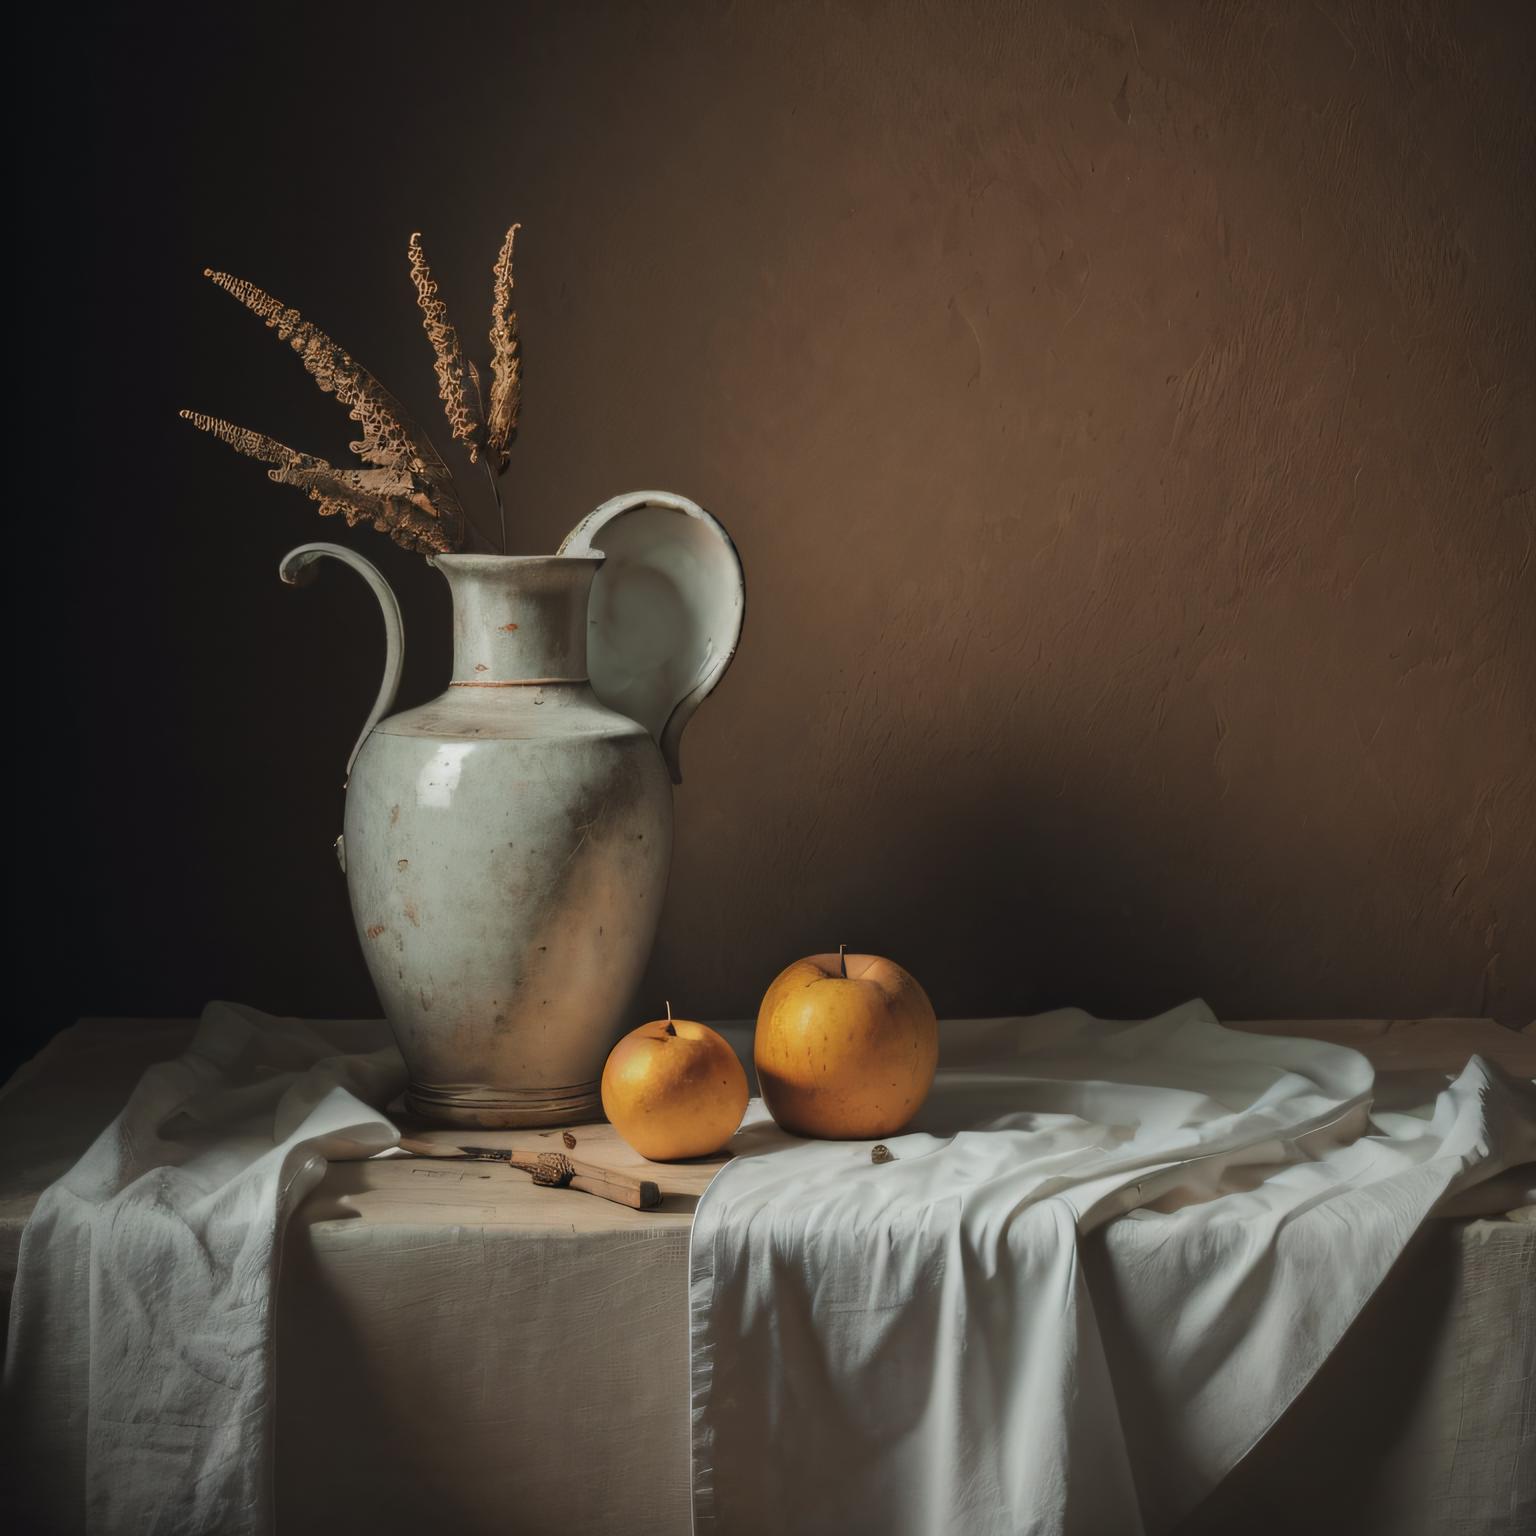 still life,Oil paintings,Flowers, fruit,静物 image by PinkCool